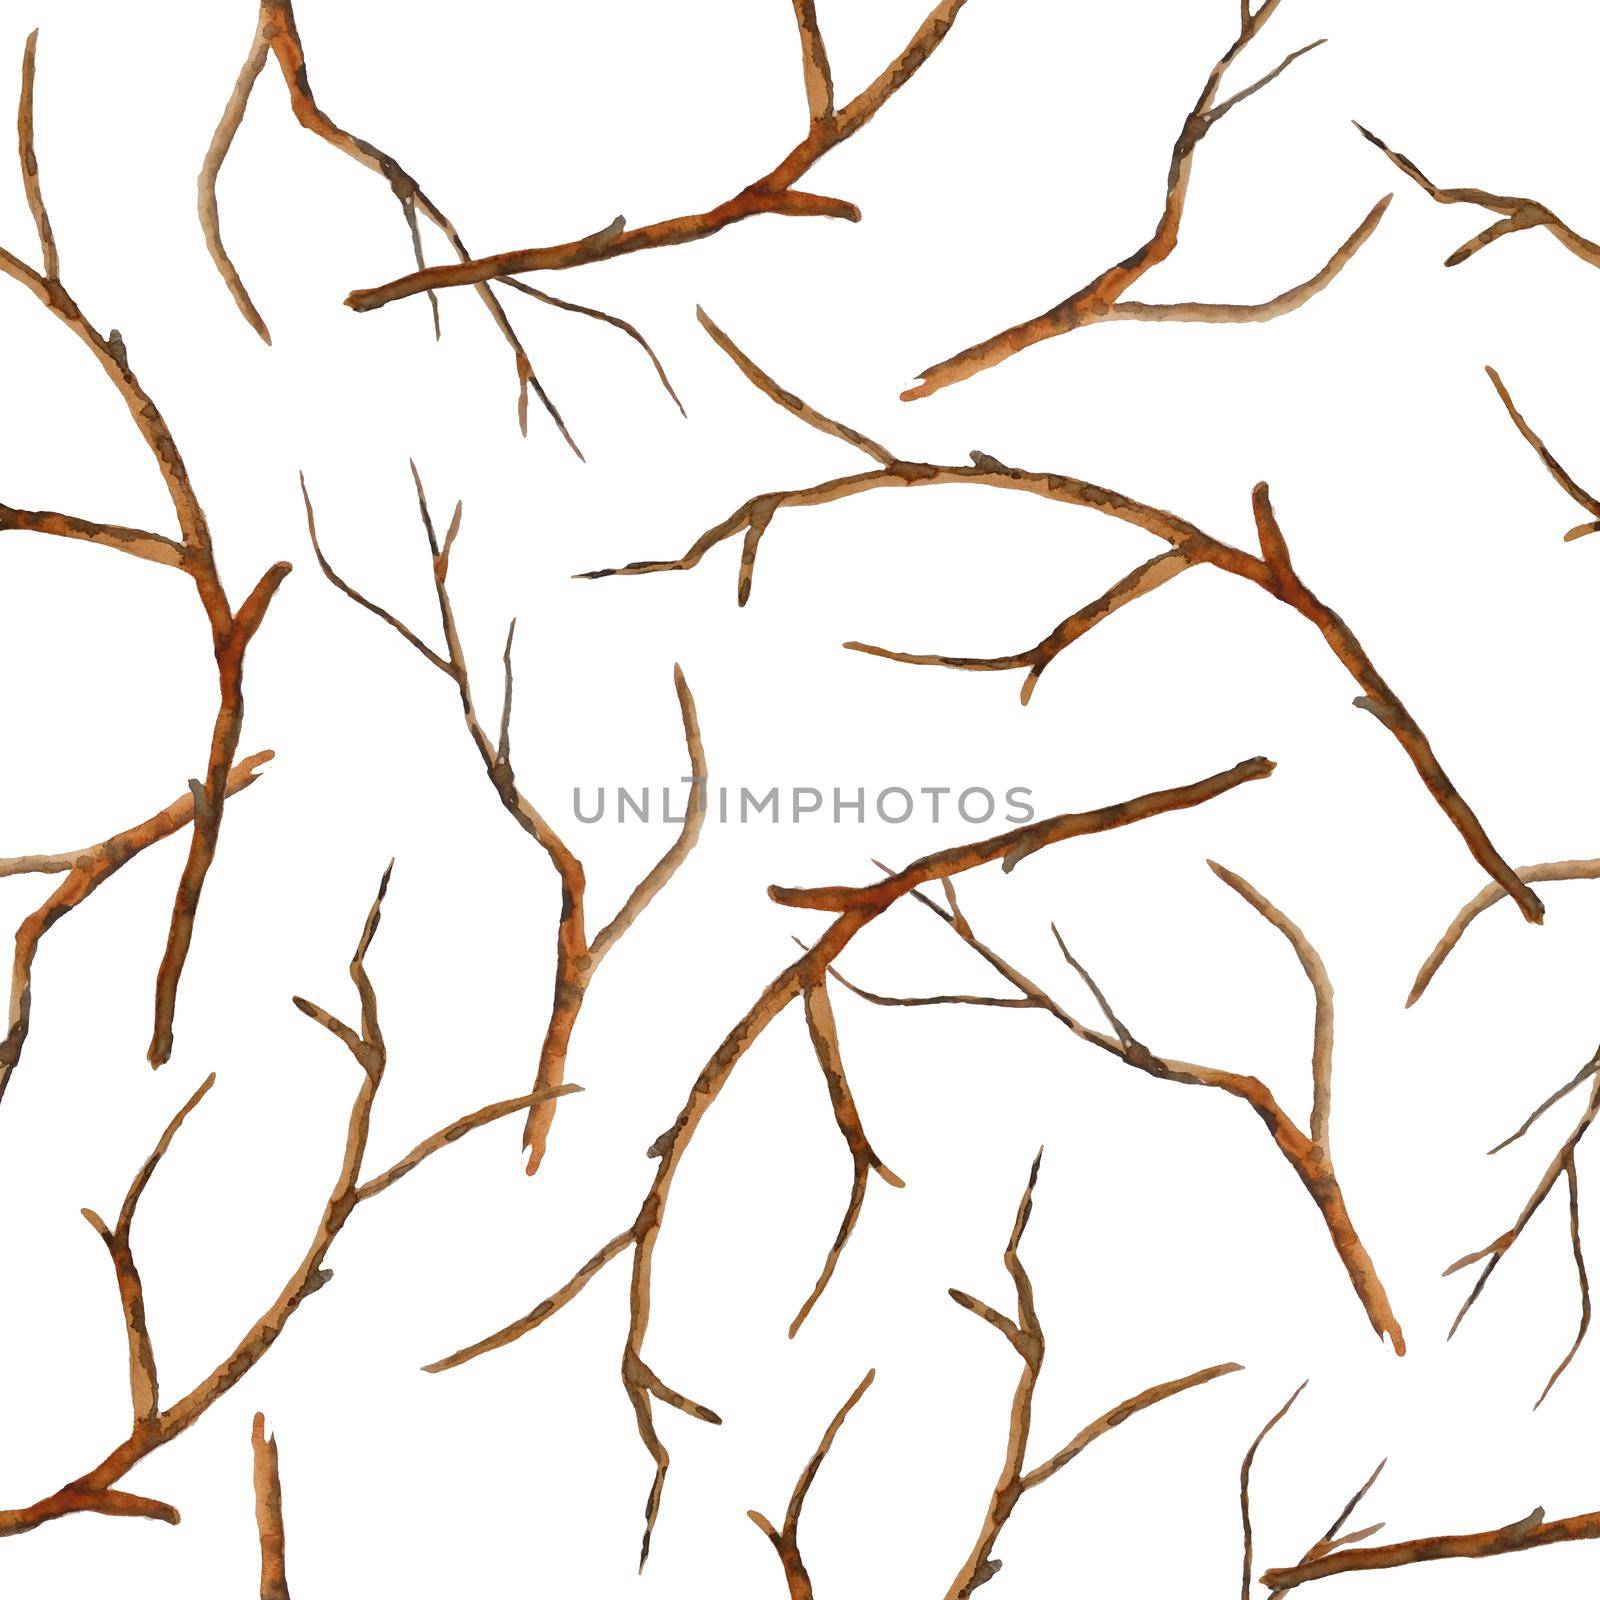 Watercolor hand drawn seamless pattern with brown branches twigs without leaves. Autumn fall winter illustration, wood woodland forest ecology environment design. Outdoor rustic elegant elements. by Lagmar